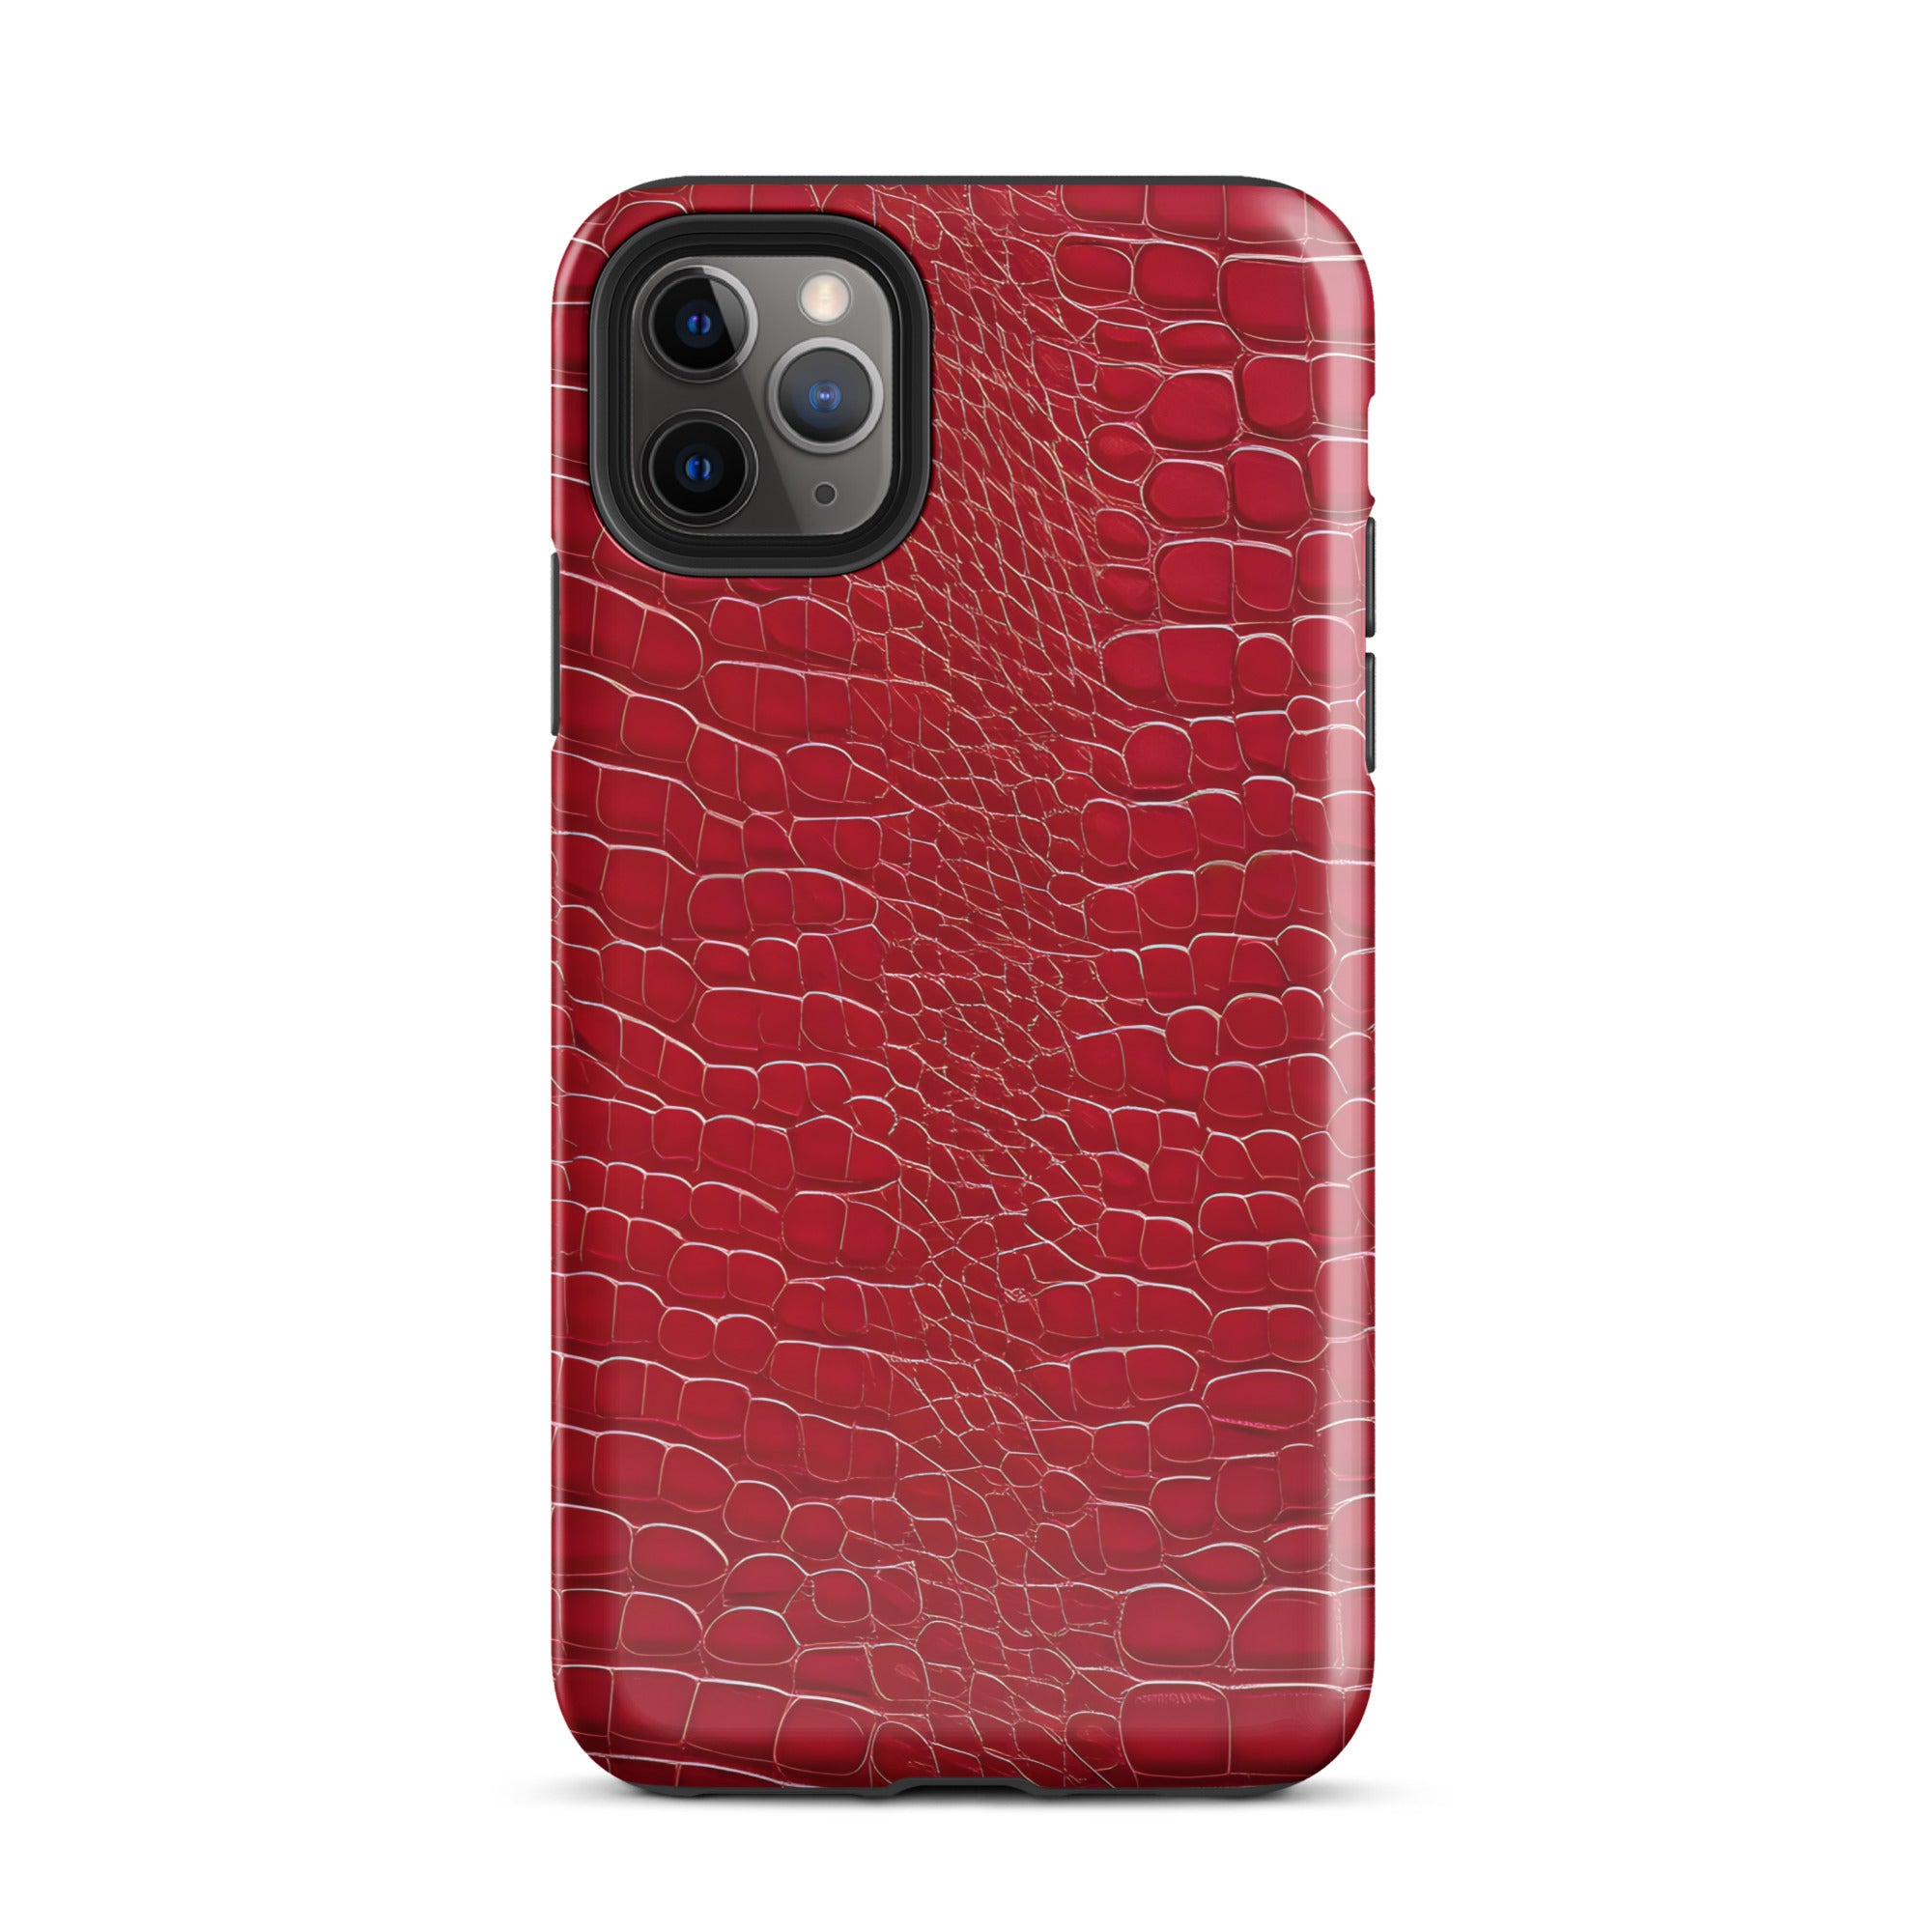 tough-case-for-iphone-glossy-iphone-11-pro-max-front-656383d5b55d0.jpg